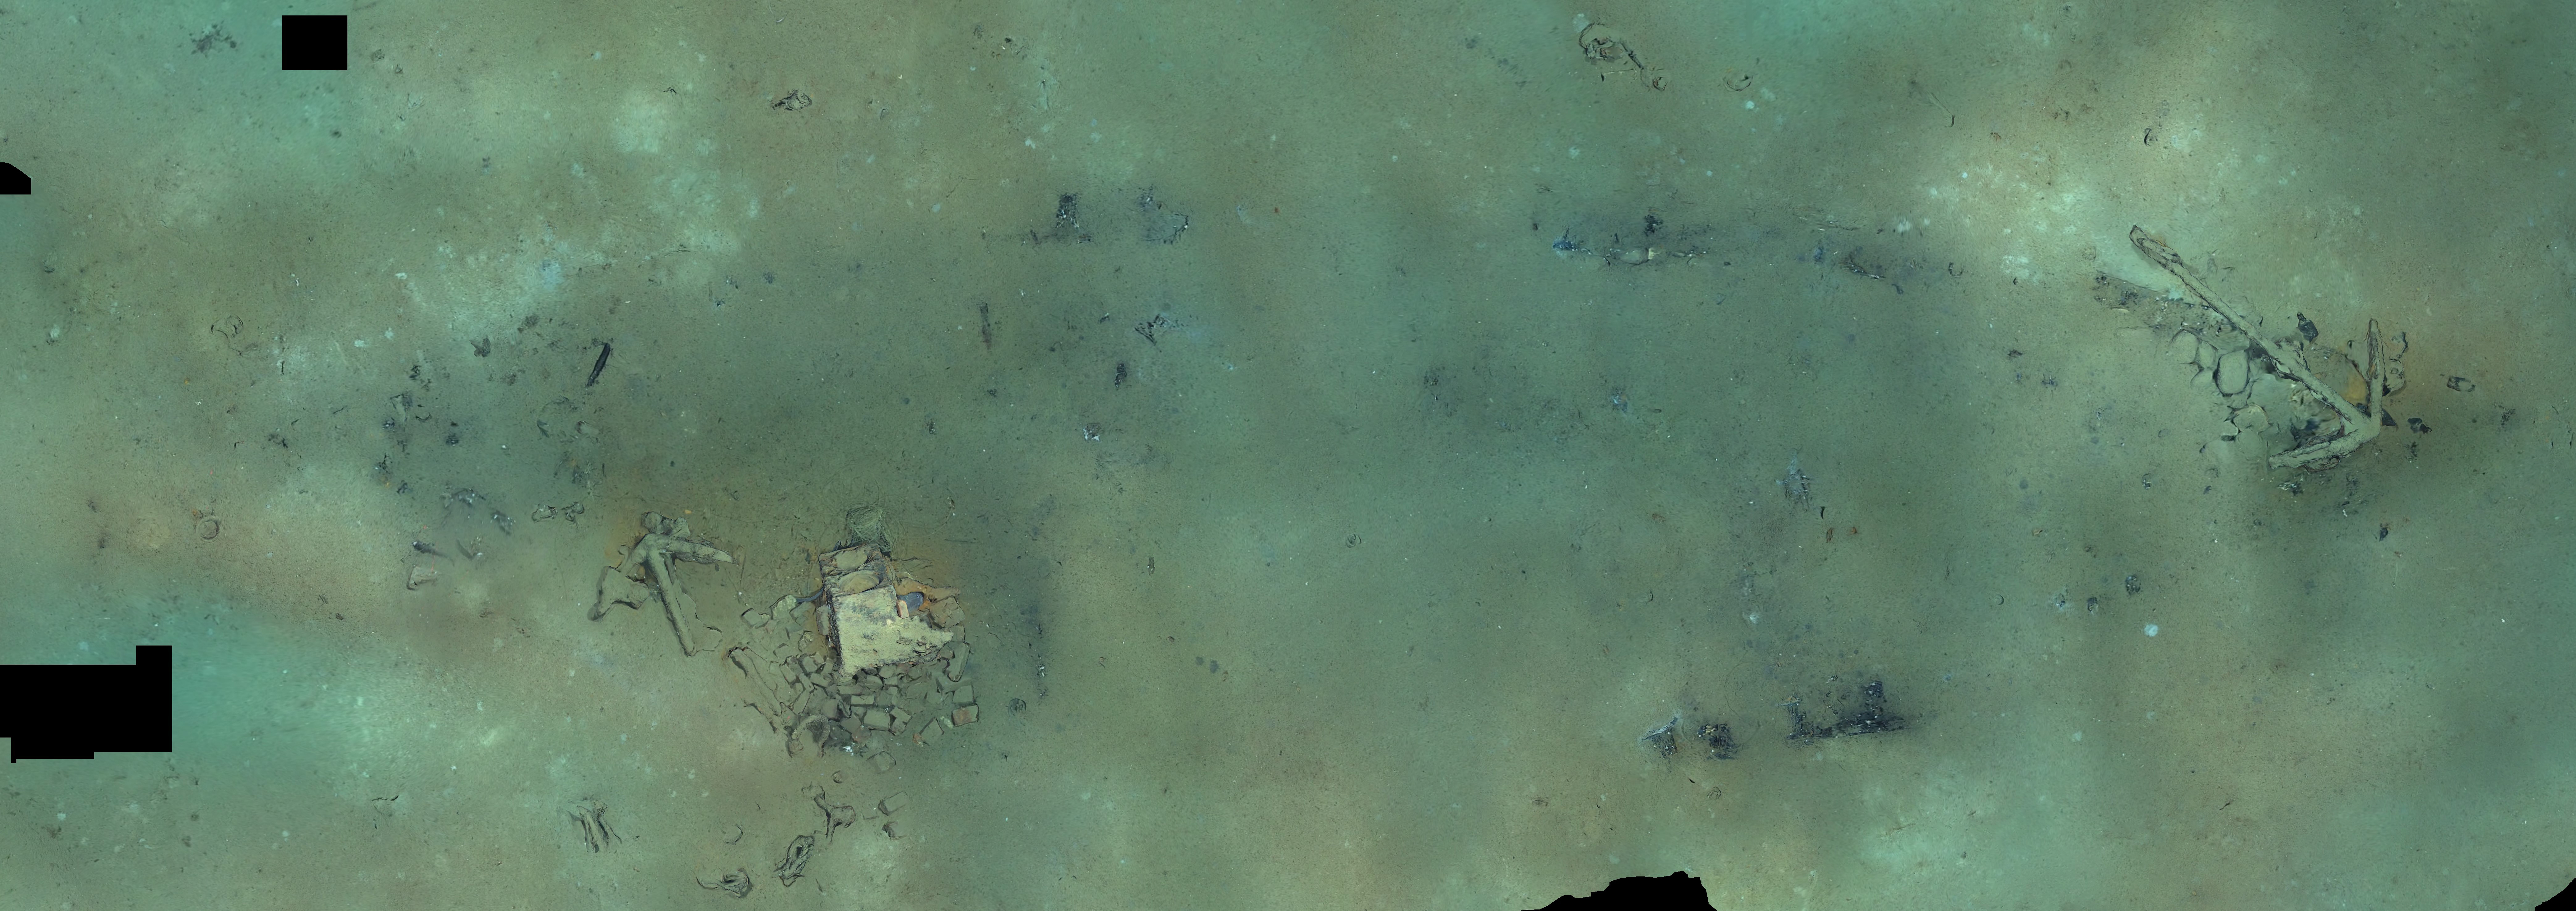 The mosaic of images from the NOAA video of the brig Industry shipwreck in the Gulf of Mexico, February 25, 2022, shows the outline in sediment and debris of the wooden hull of the 64-foot by 20-foot whaling brig. The tryworks and two anchors are also visible. A third anchor is buried in the sediment near the tryworks. Mosaic was created by the Bureau of Ocean Energy Management using NOAA ROV video footage.